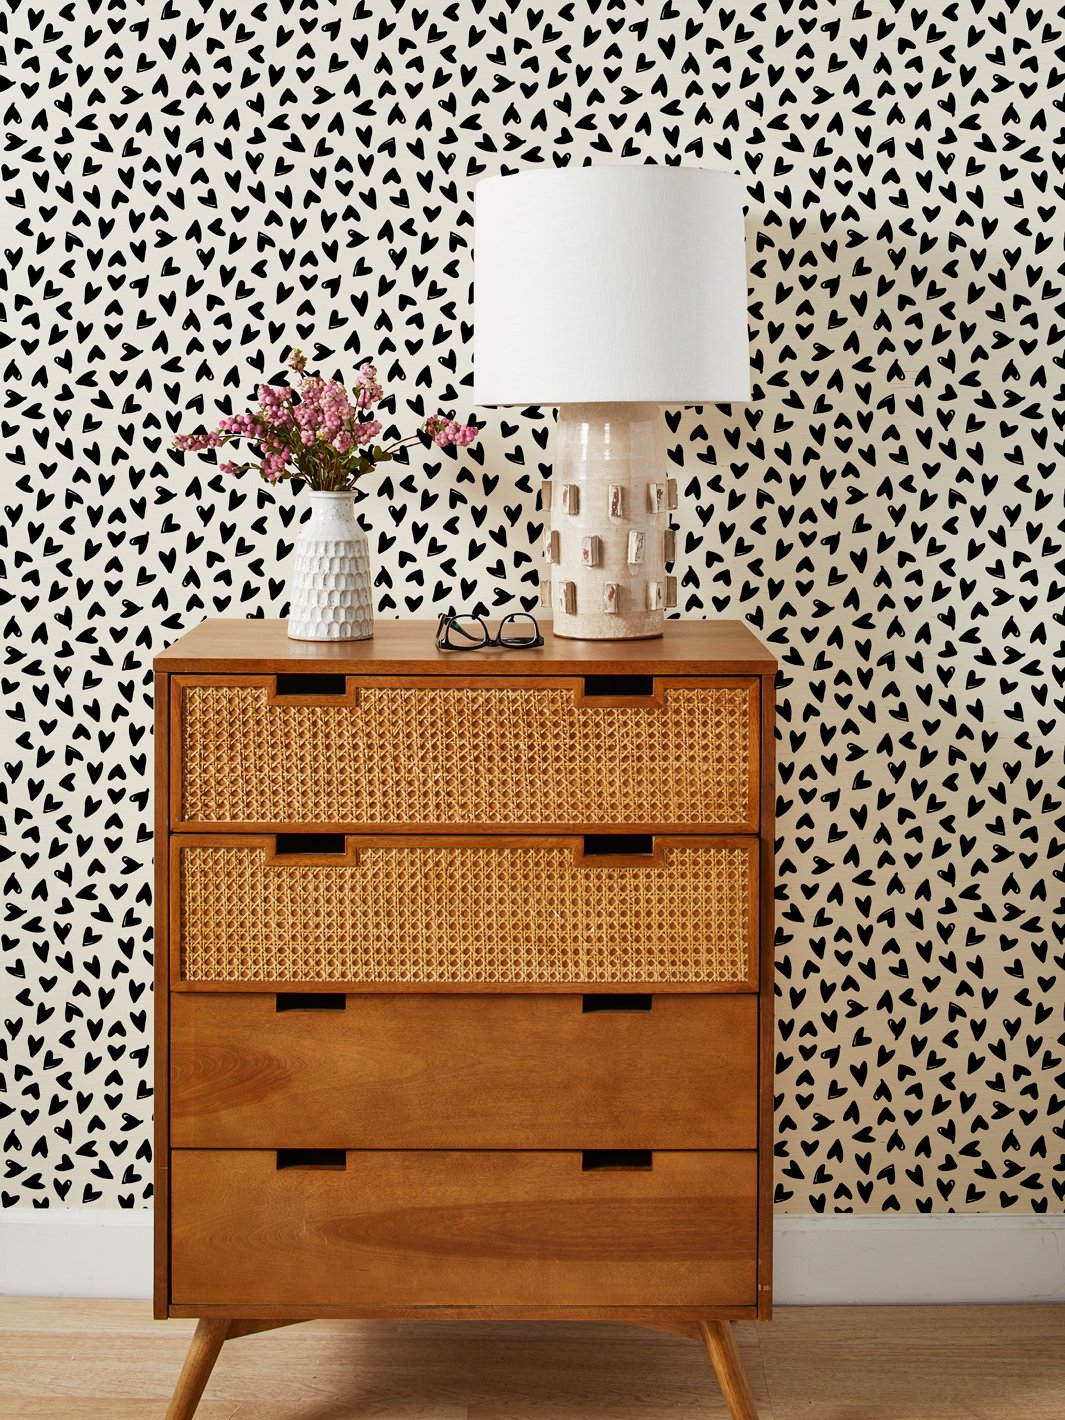 'Scattered Hearts' Grasscloth' Wallpaper by Sugar Paper - Black